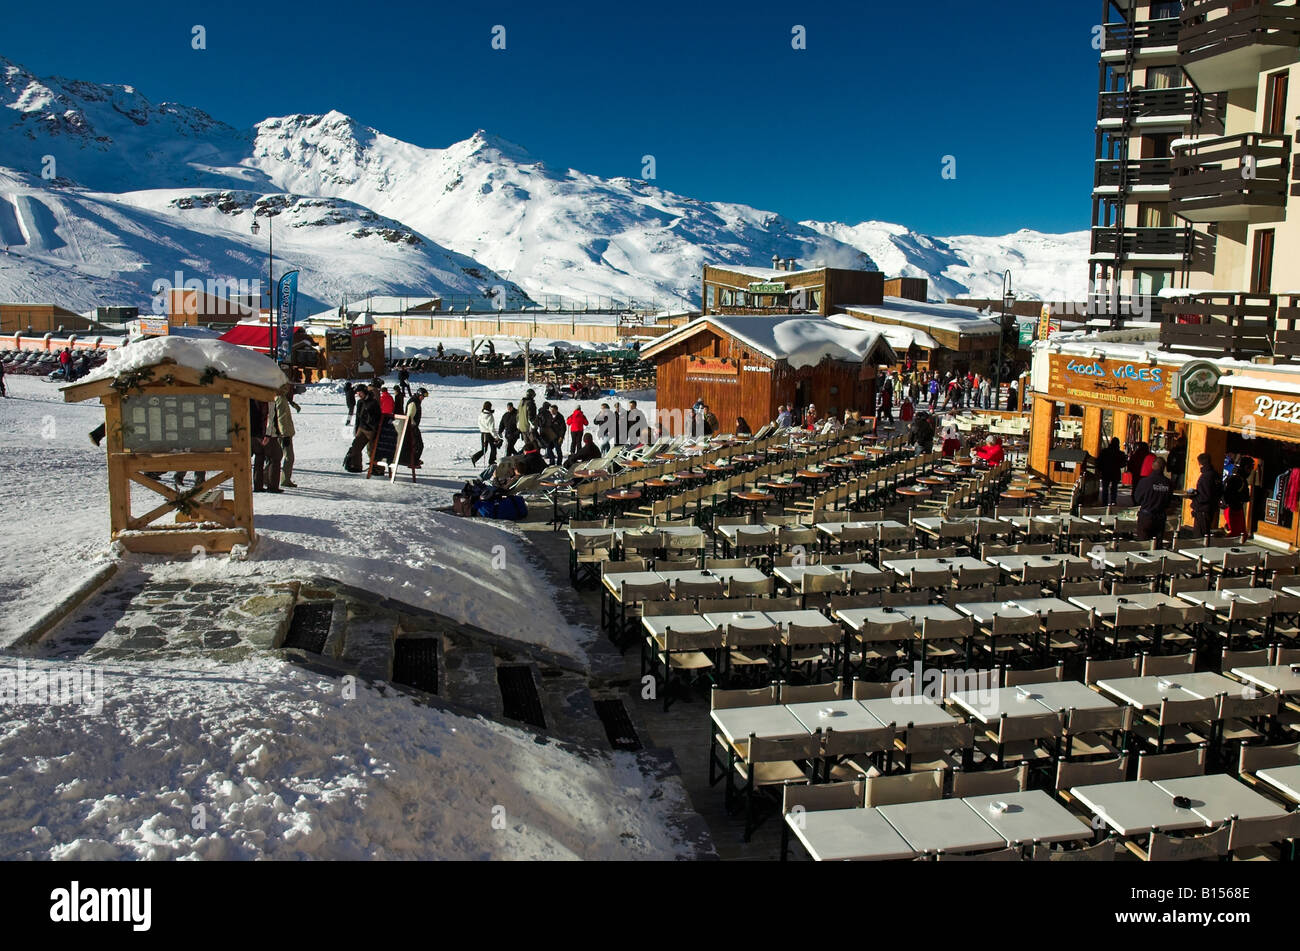 The resort centre at Val Thorens in the 3 Valleys ski area of France Stock Photo